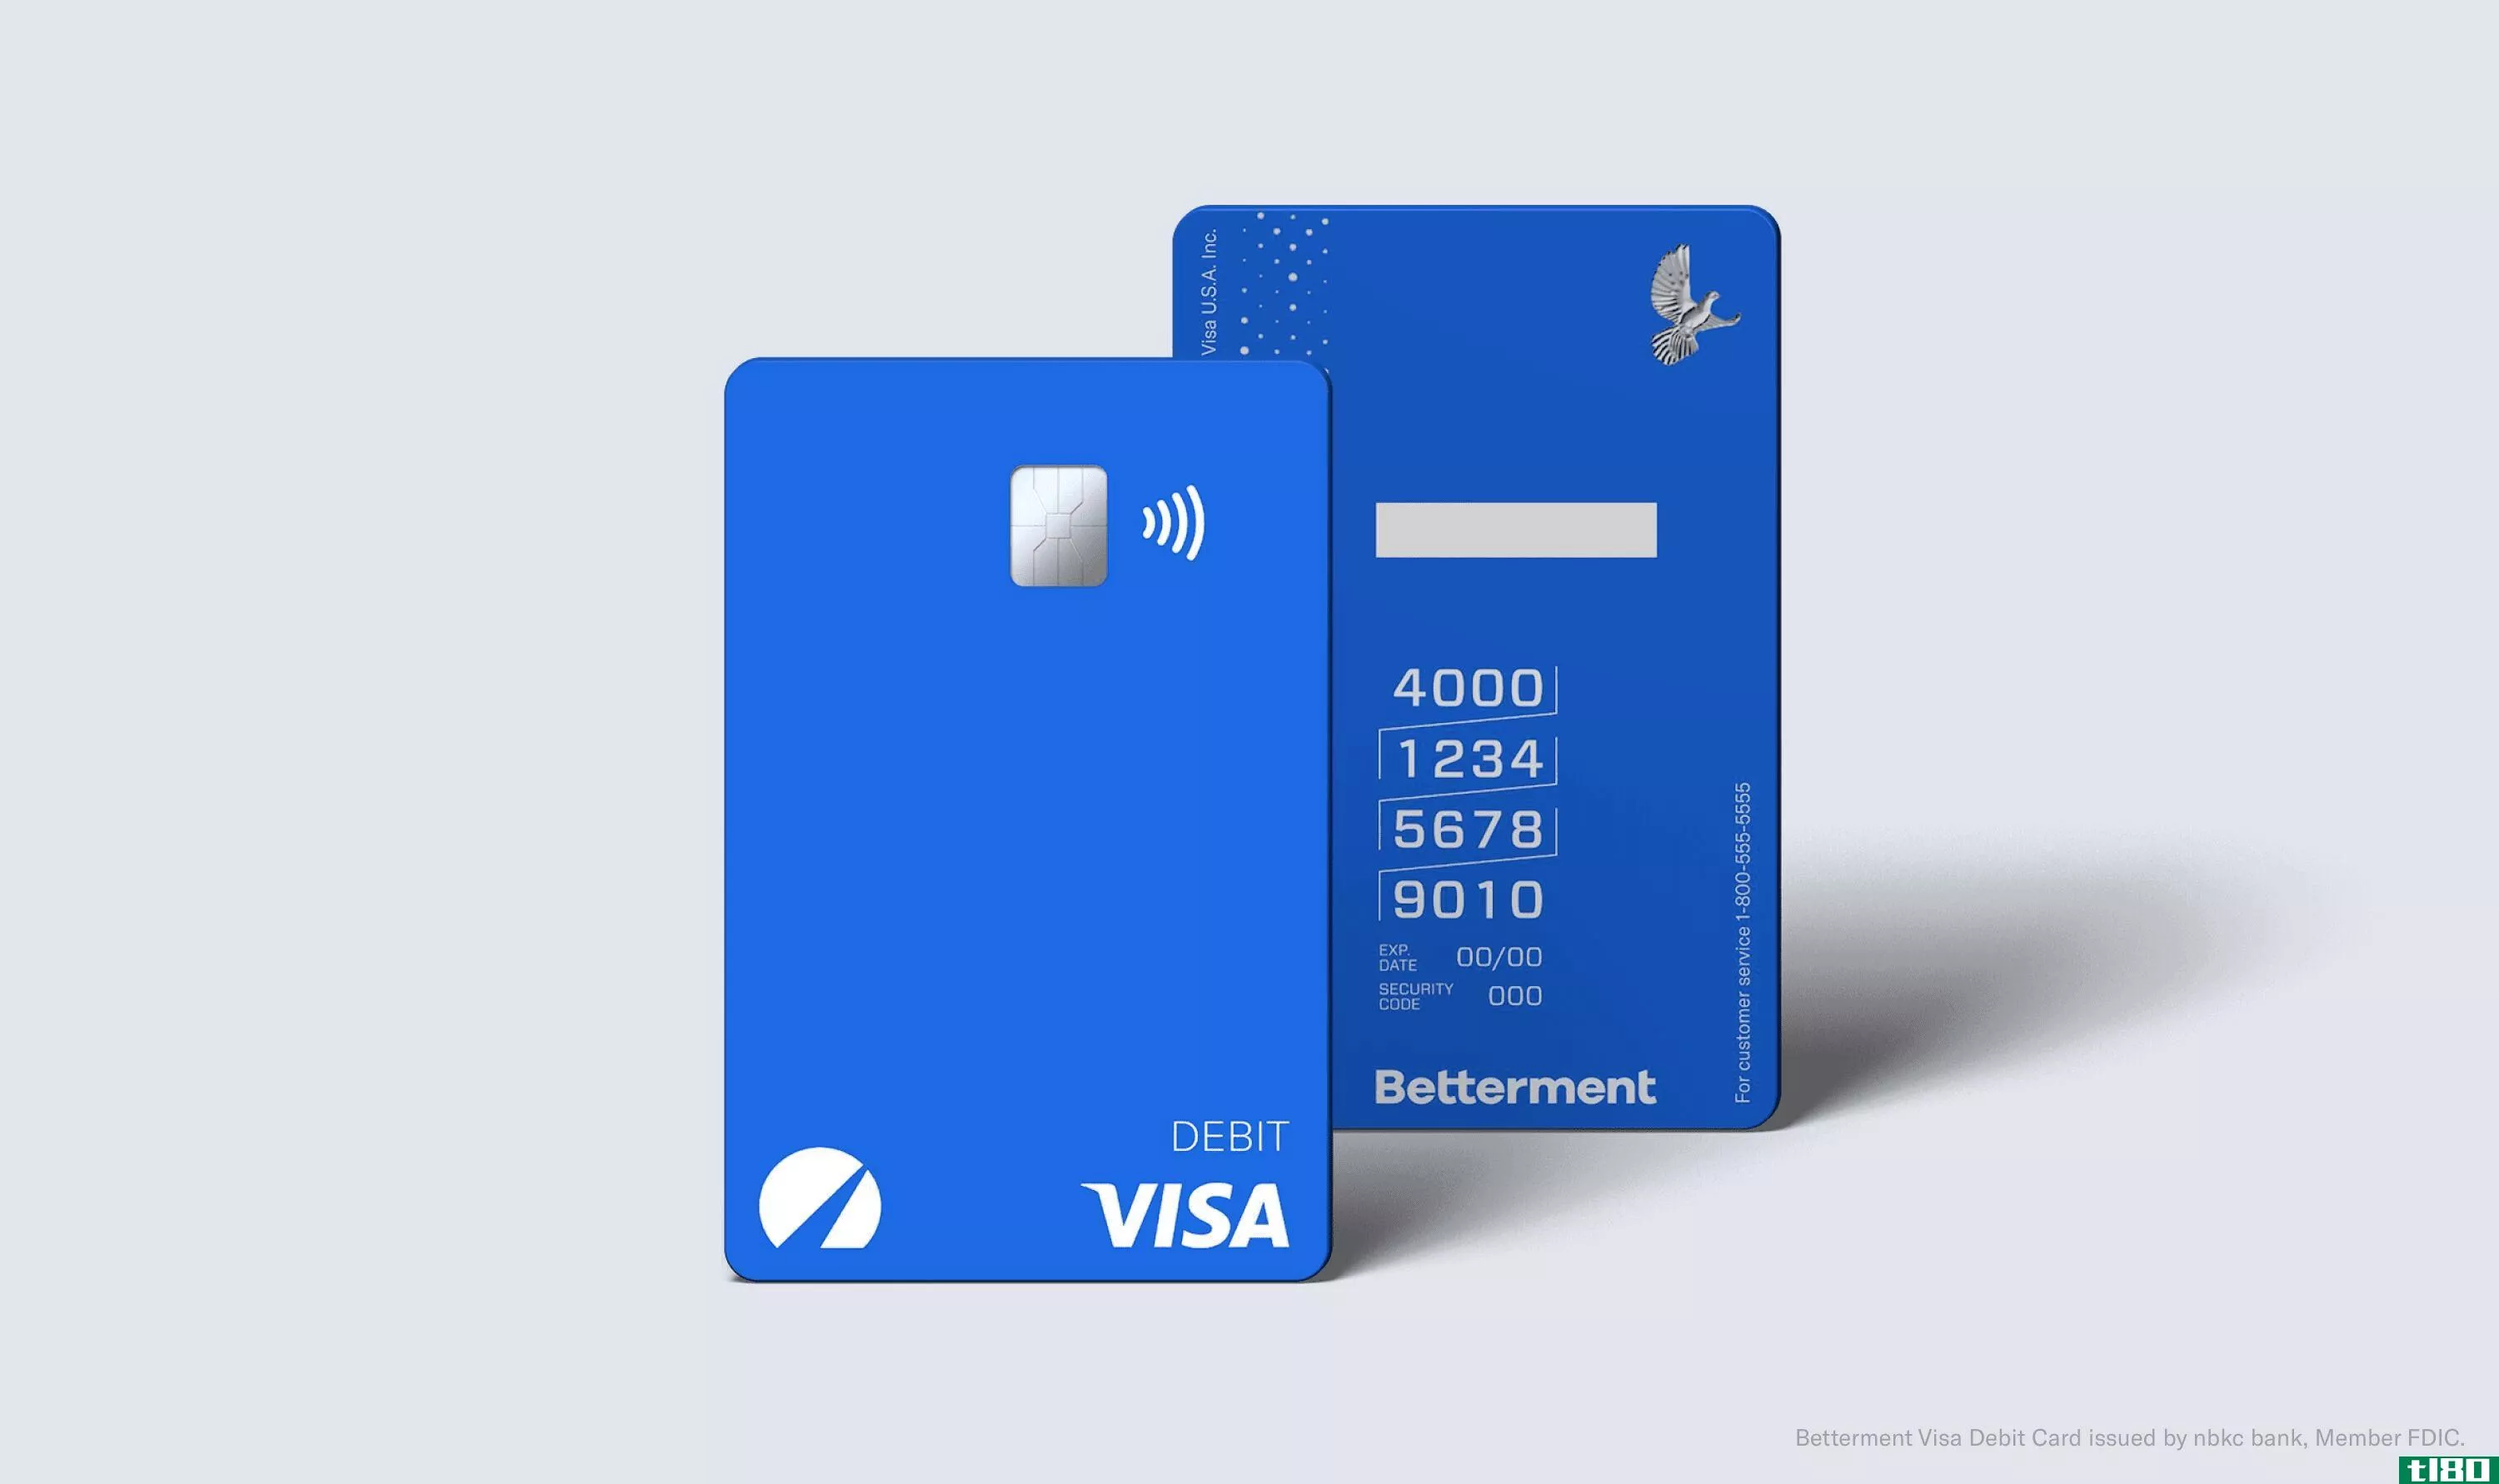 Betterment's Checking product includes a debit card